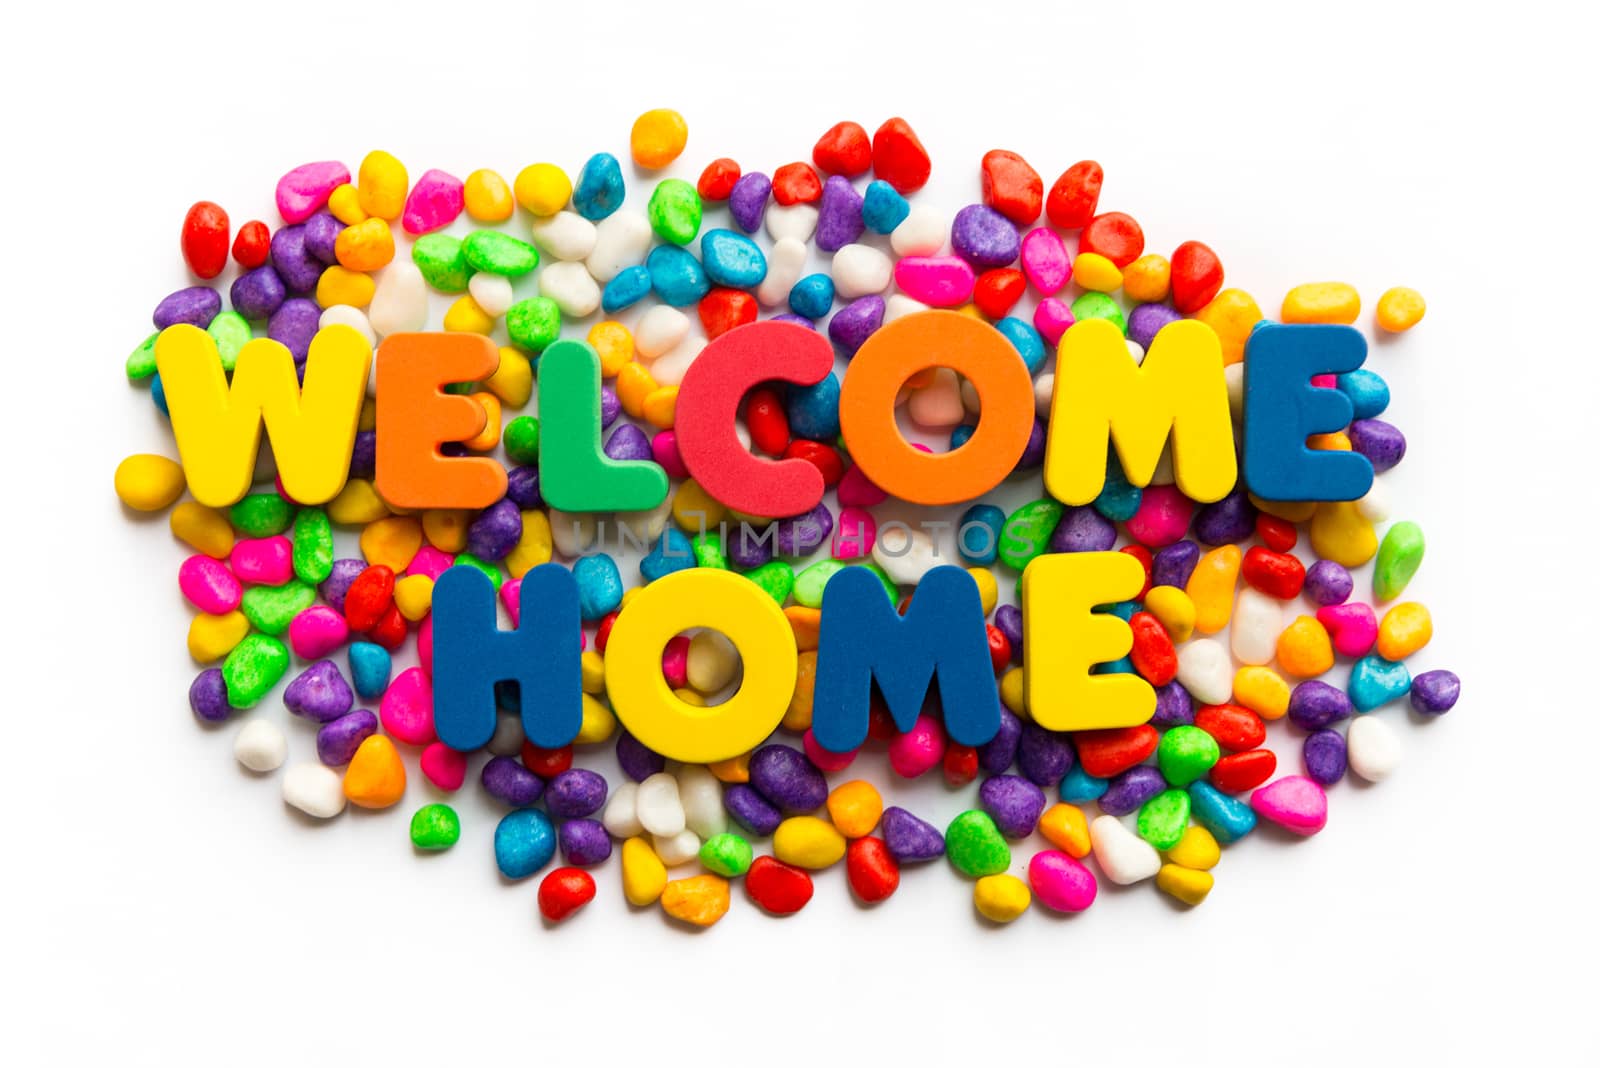 welcome home word in colorful stone by sohel.parvez@hotmail.com